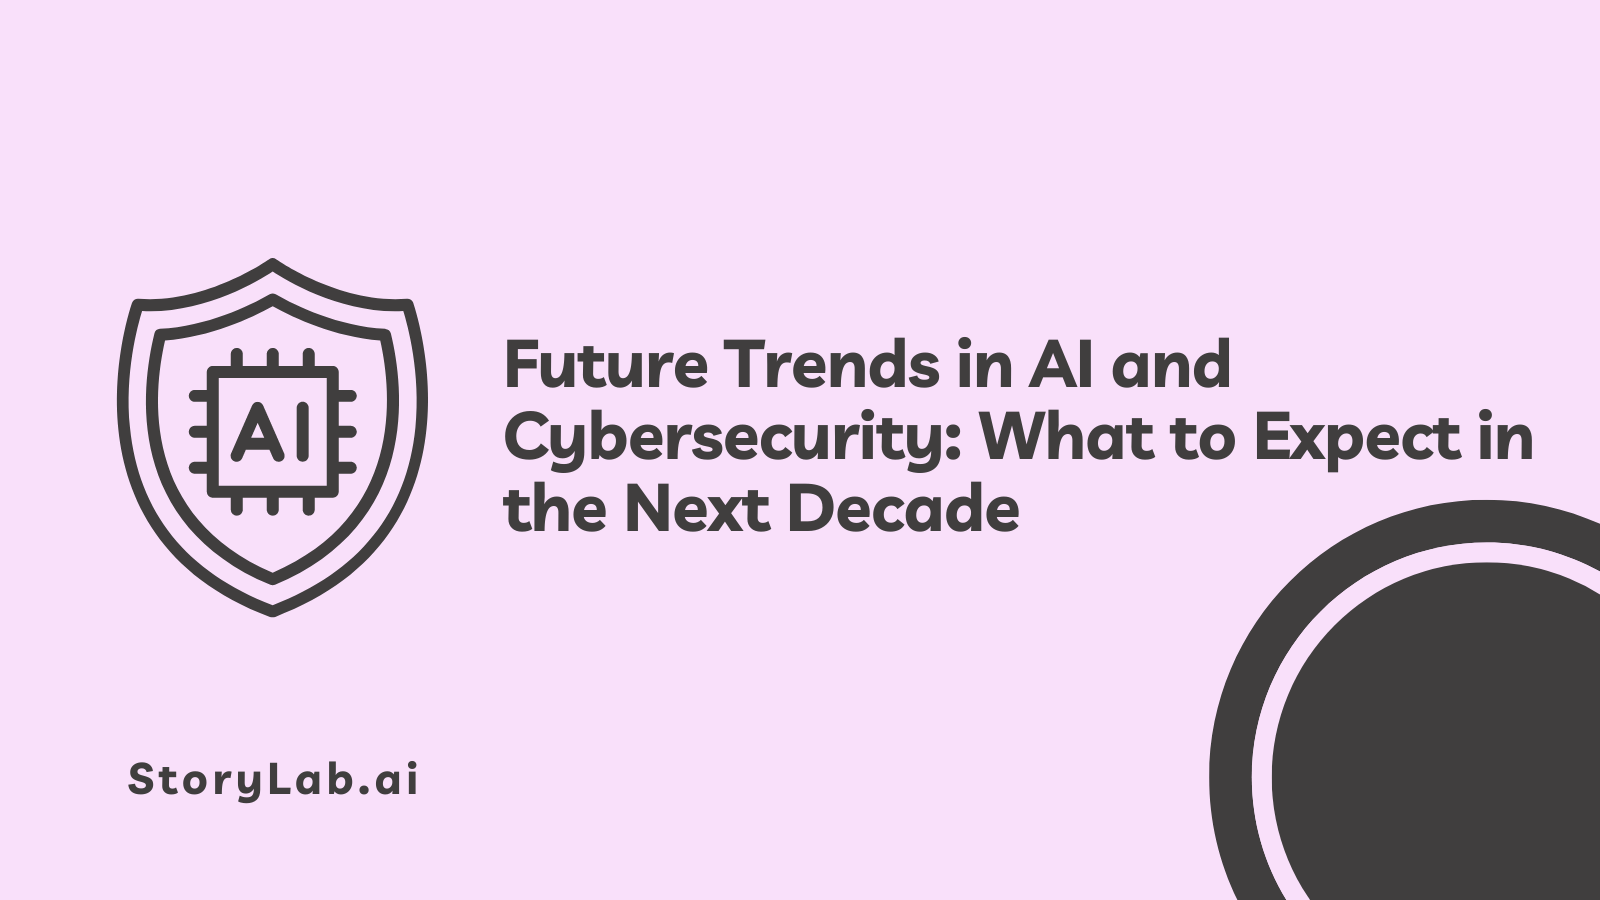 Future Trends in AI and Cybersecurity What to Expect in the Next Decade